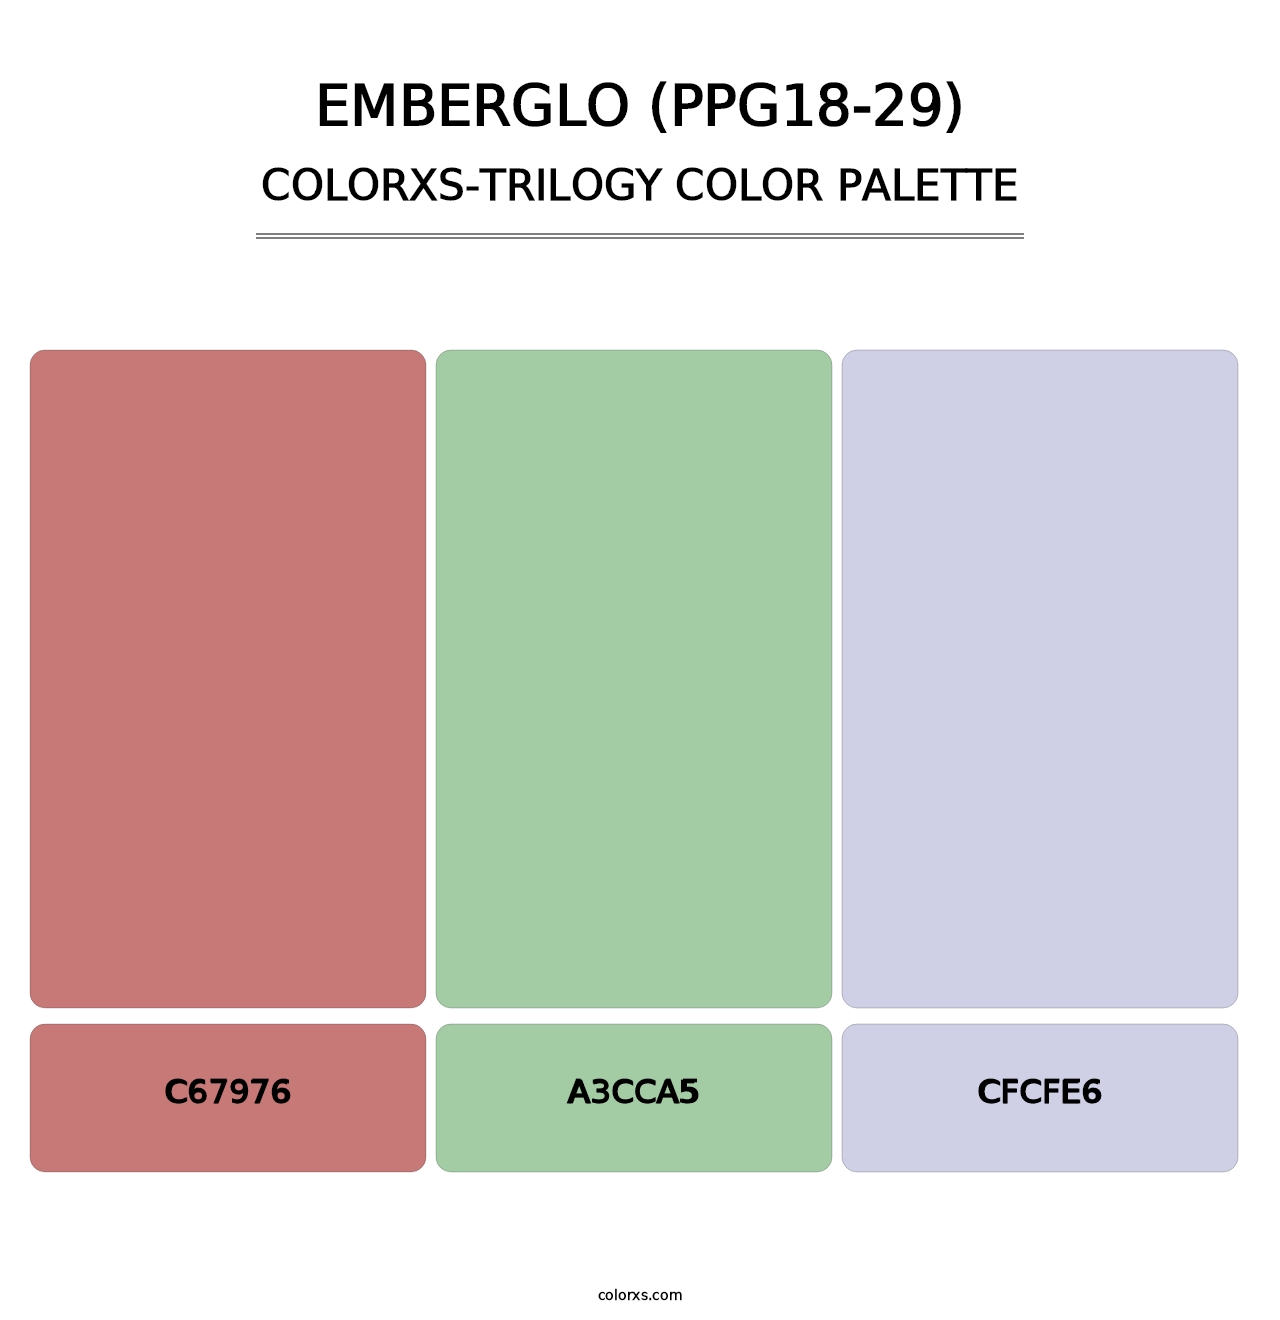 Emberglo (PPG18-29) - Colorxs Trilogy Palette